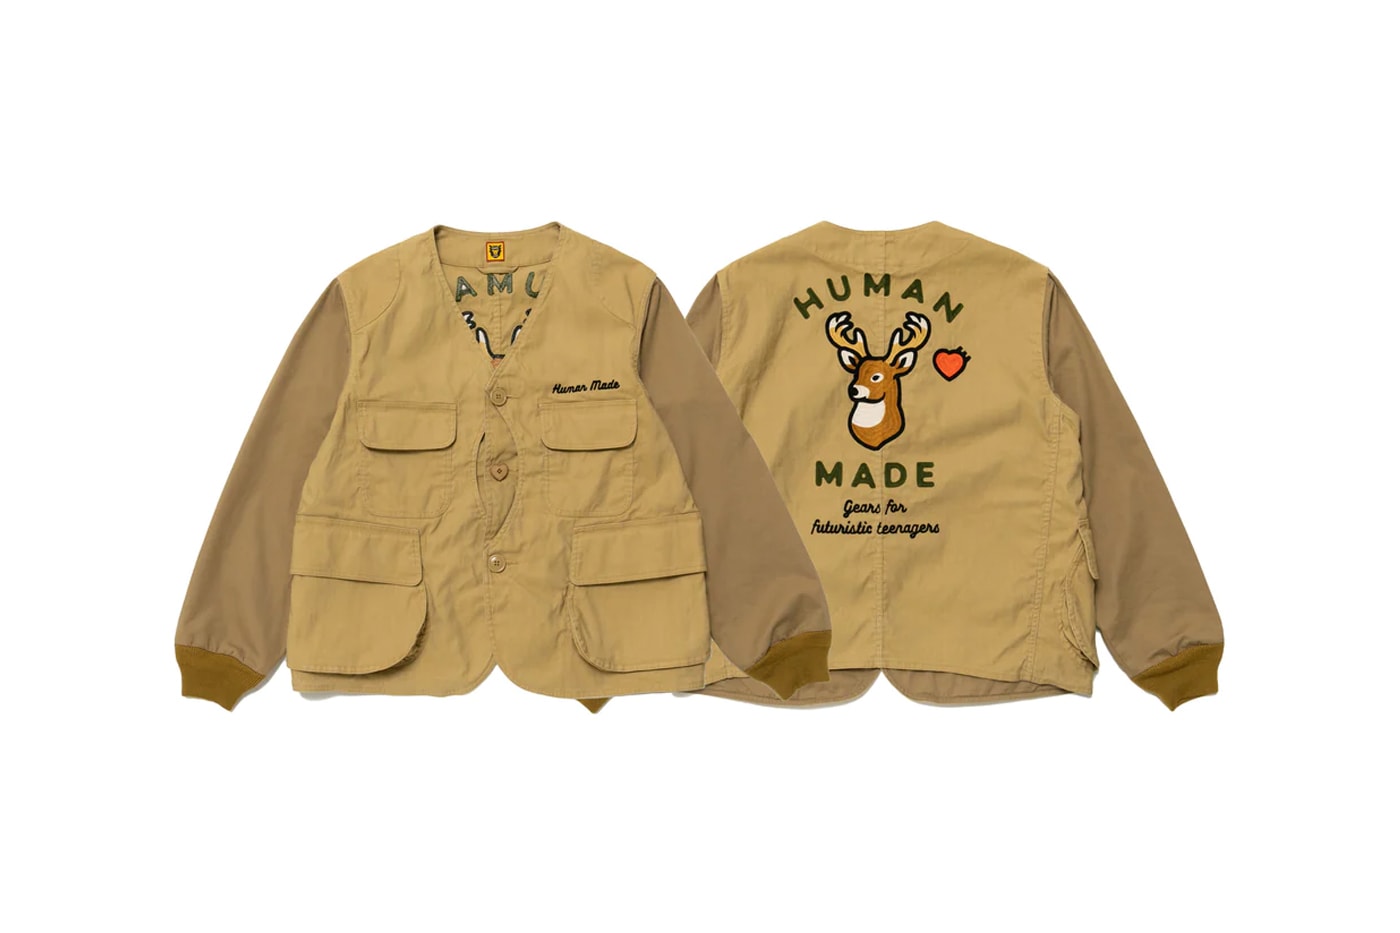 Human Made hunting collection march 4 jacket vest pullover sweater vintage bags duck deer retriever release info date price